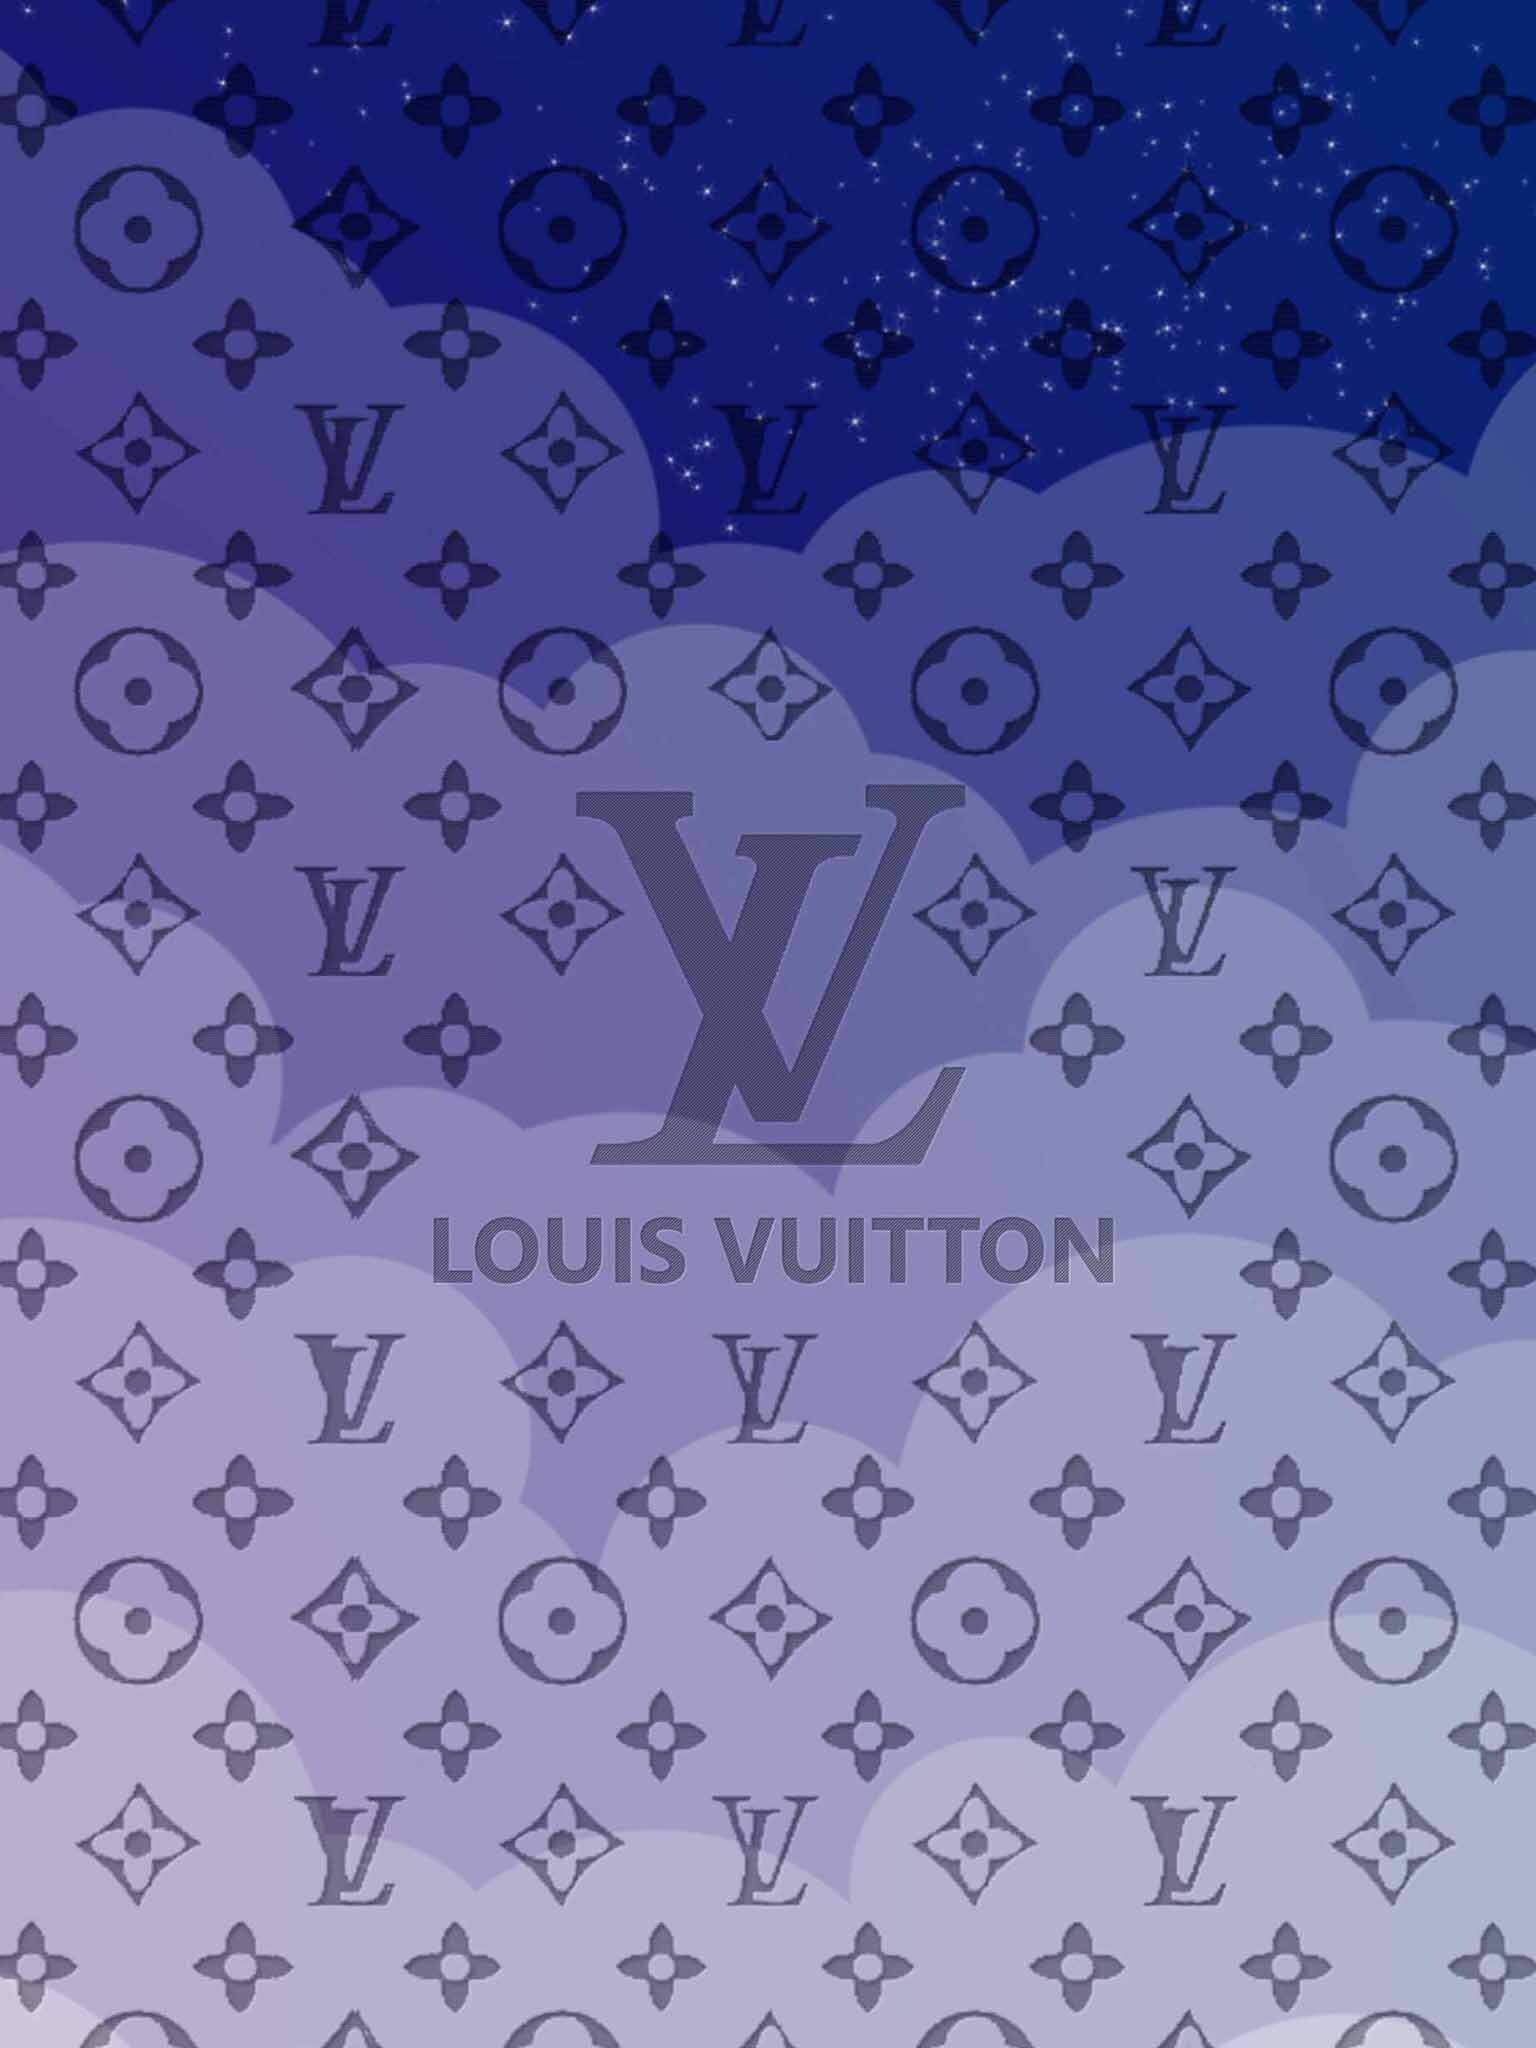 Louis Vuitton: The brand is a leader in the fashion industry. 1540x2050 HD Wallpaper.